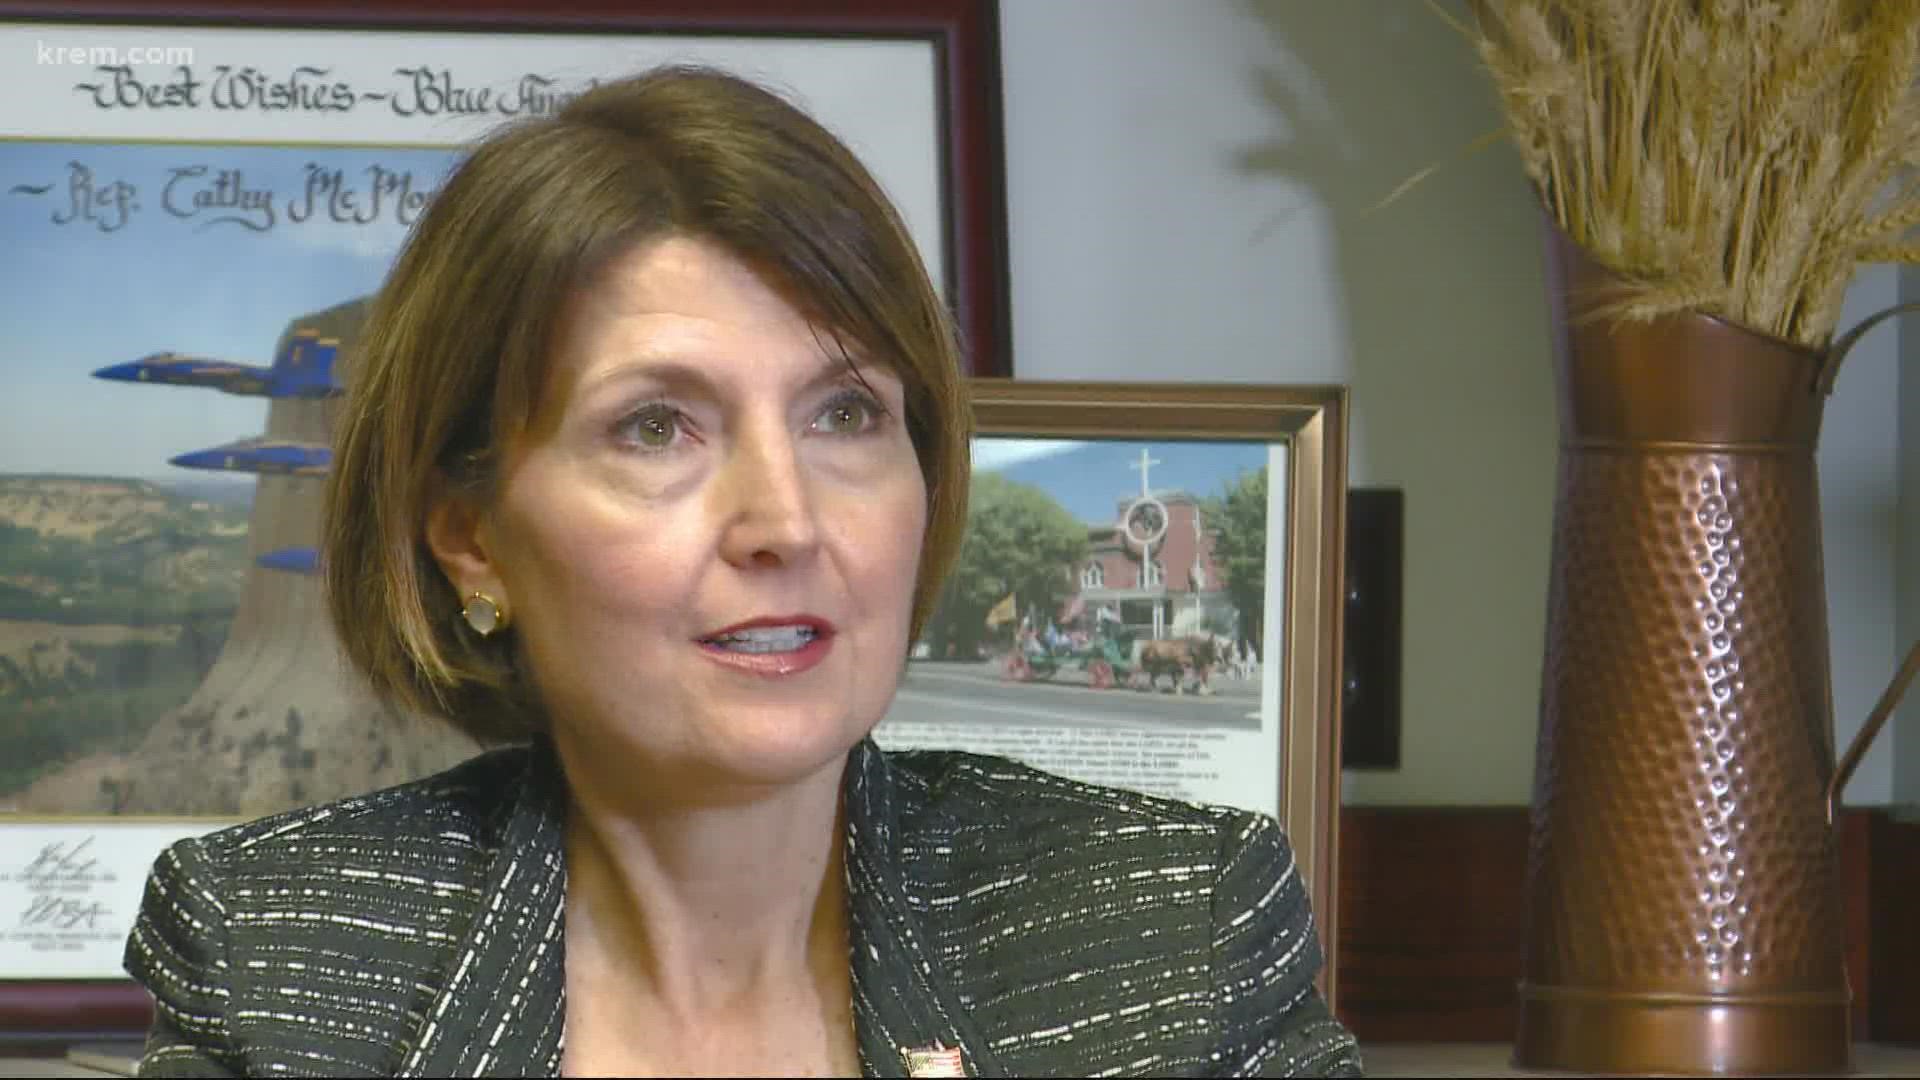 Cathy McMorris Rodgers tests positive for COVID-19, despite being fully vaccinated.